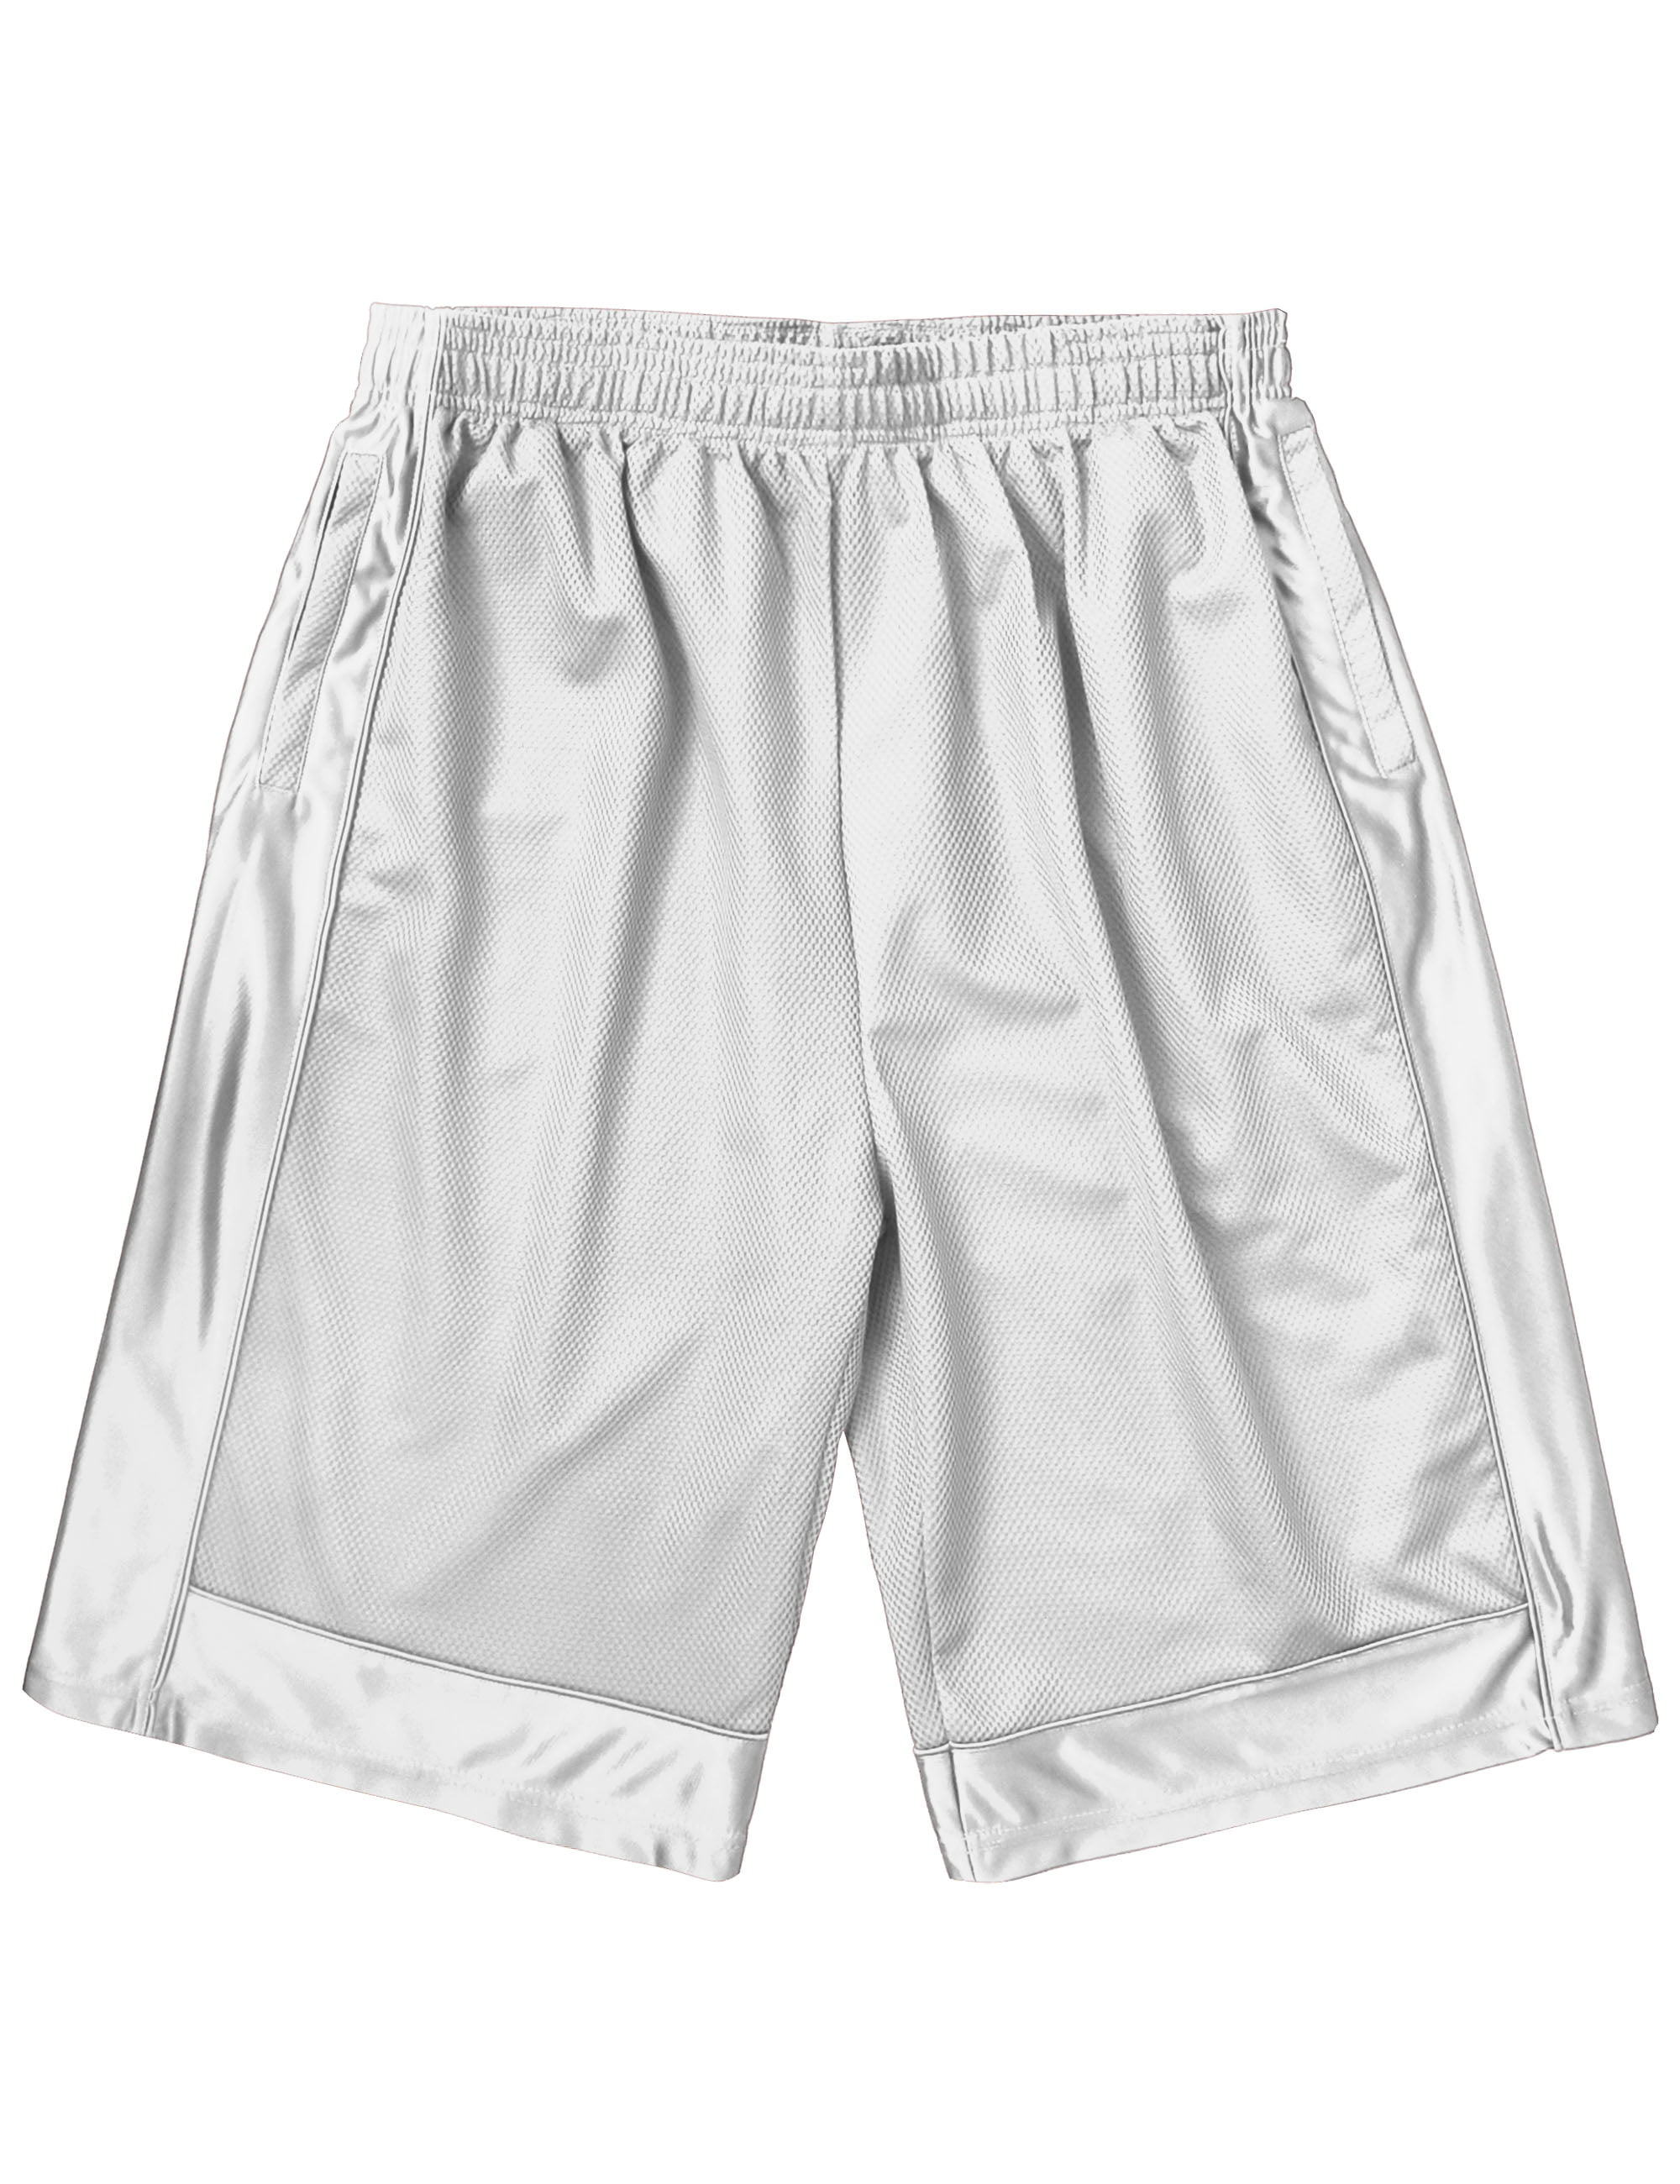 Ma Croix Mens Premium Basketball Mesh Shorts Heavyweight with Secure Zipper Back Pocket Big and Tall S-5XL 